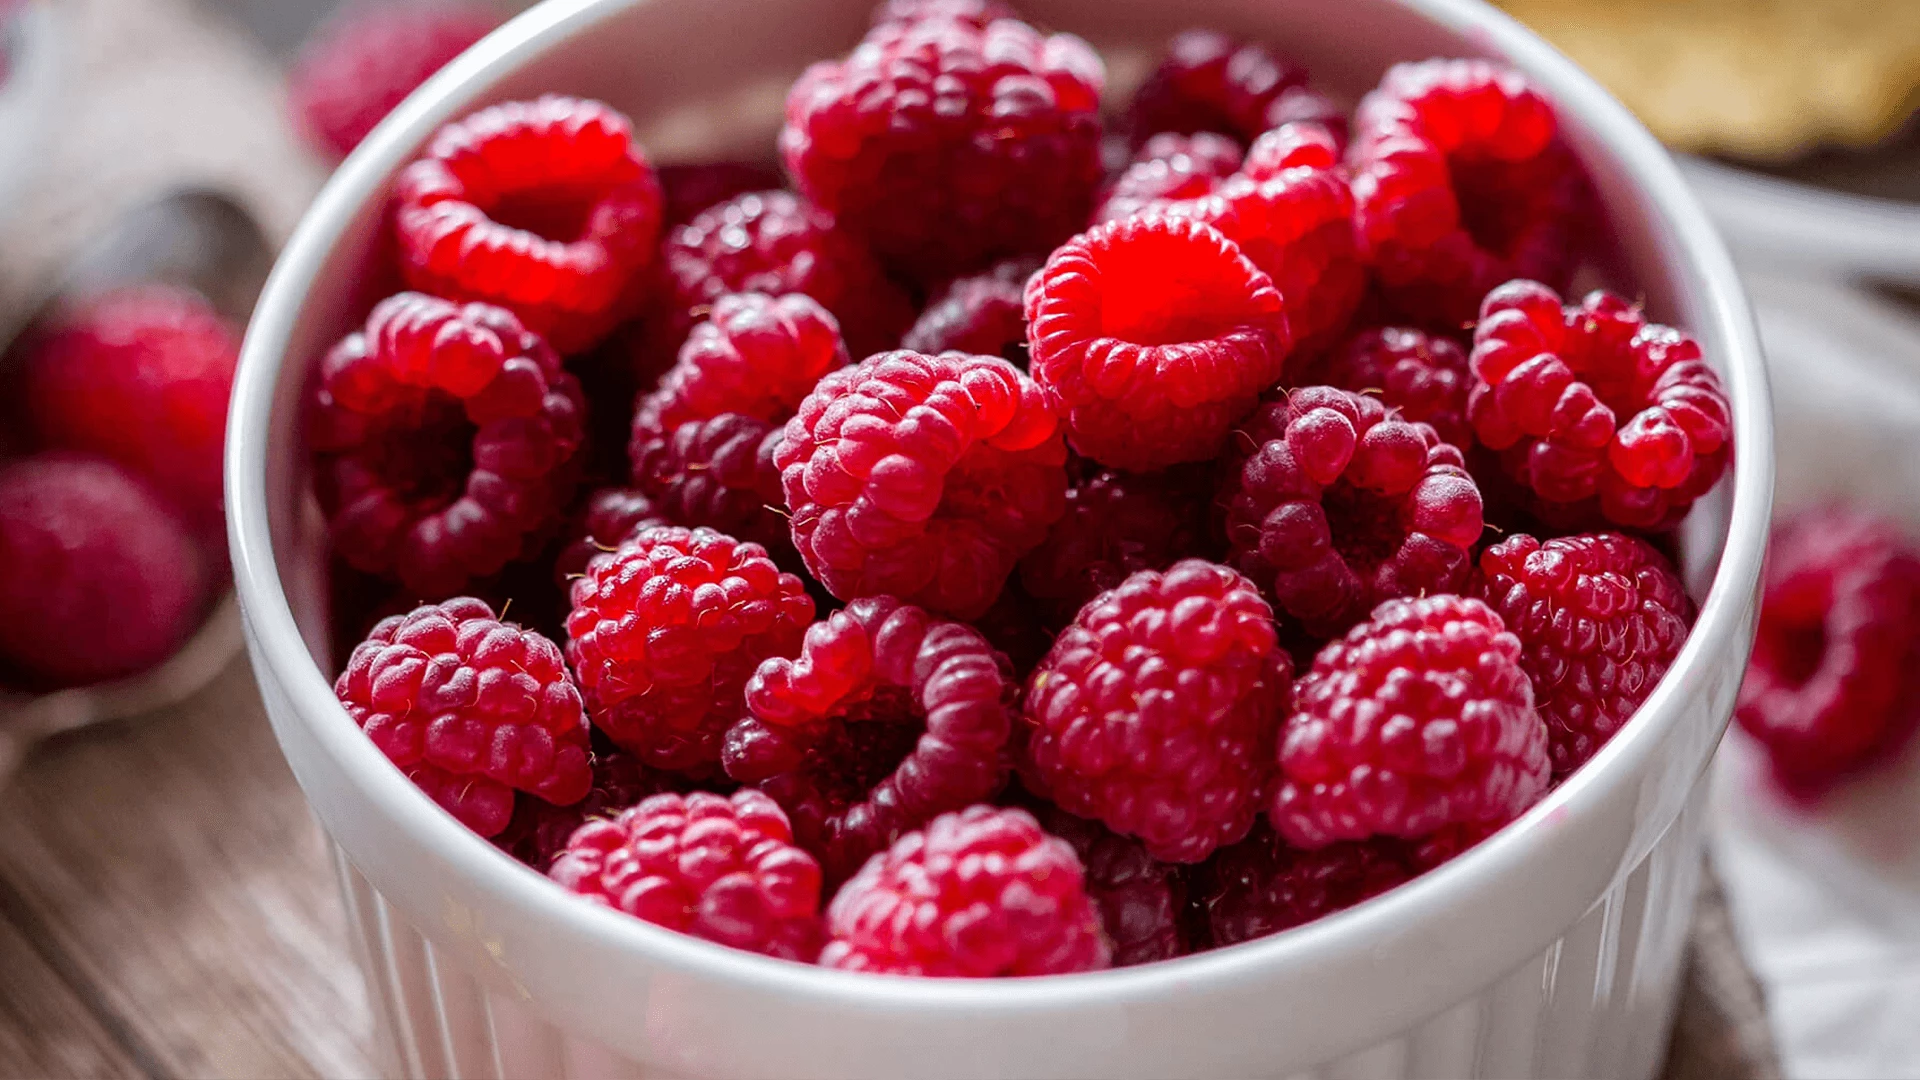 A bowl of raspberries, a soft snack for the elderly